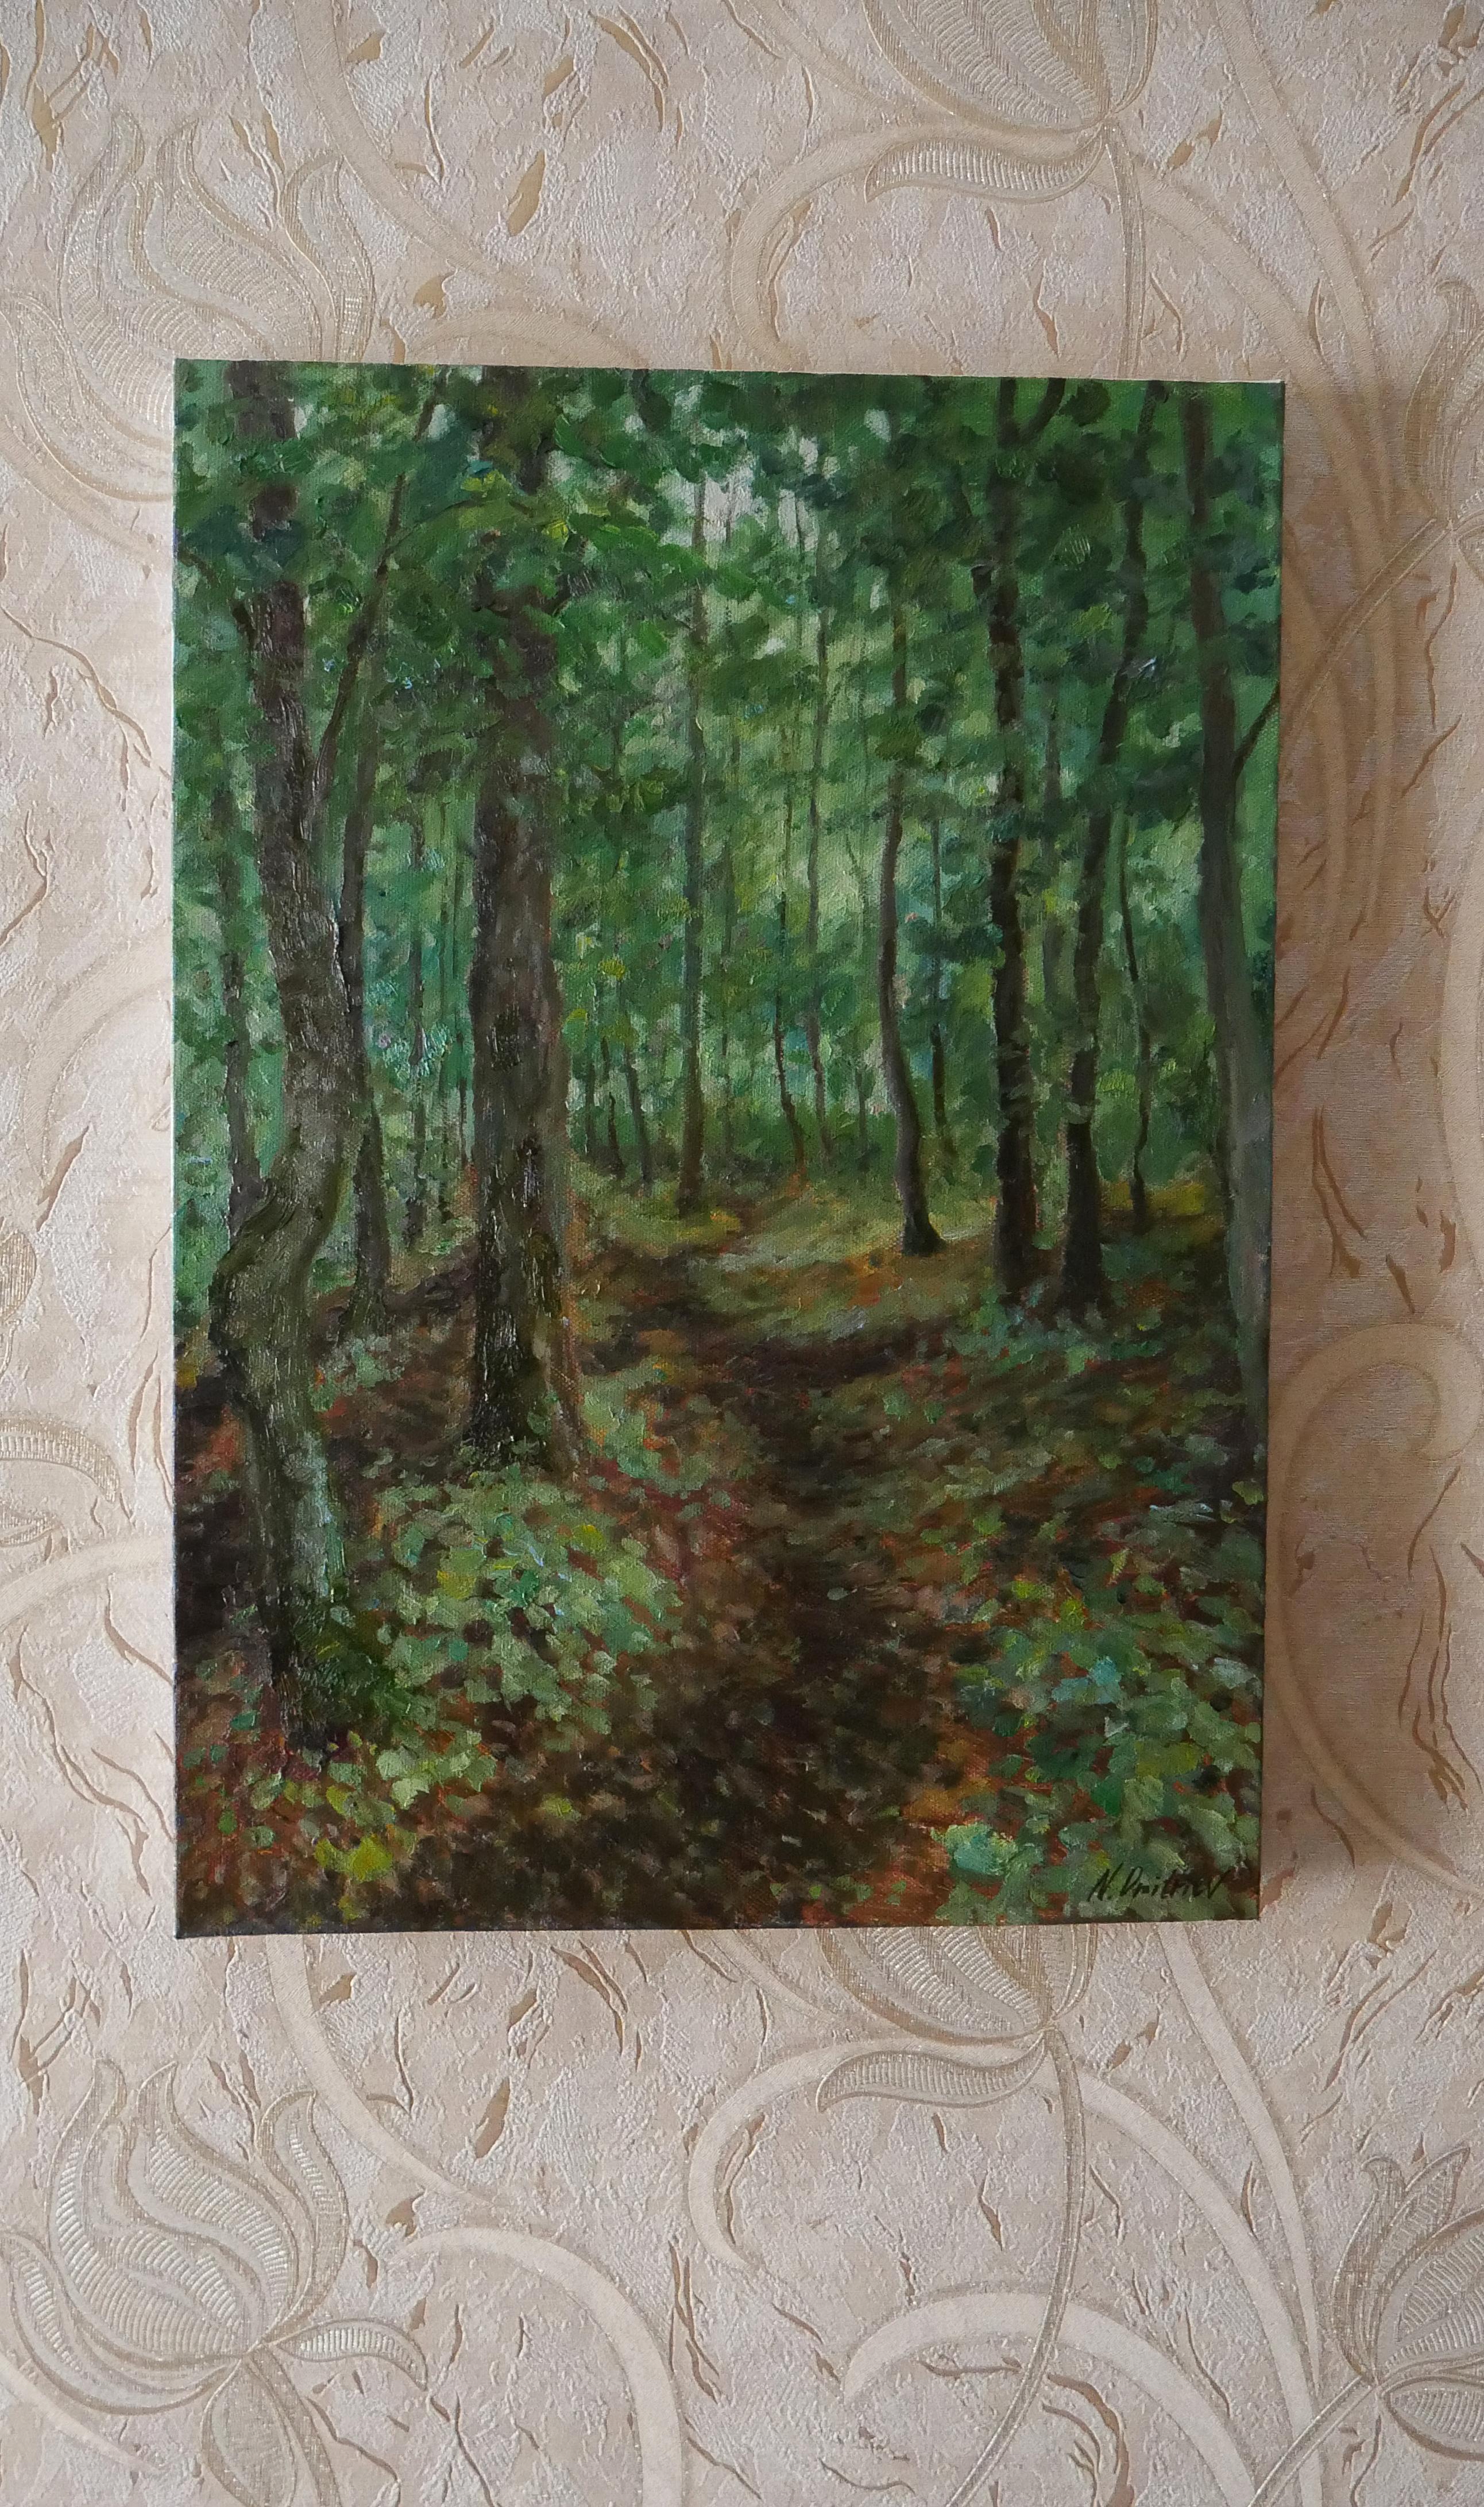 The Forest Path - summer landscape painting - Impressionist Painting by Nikolay Dmitriev